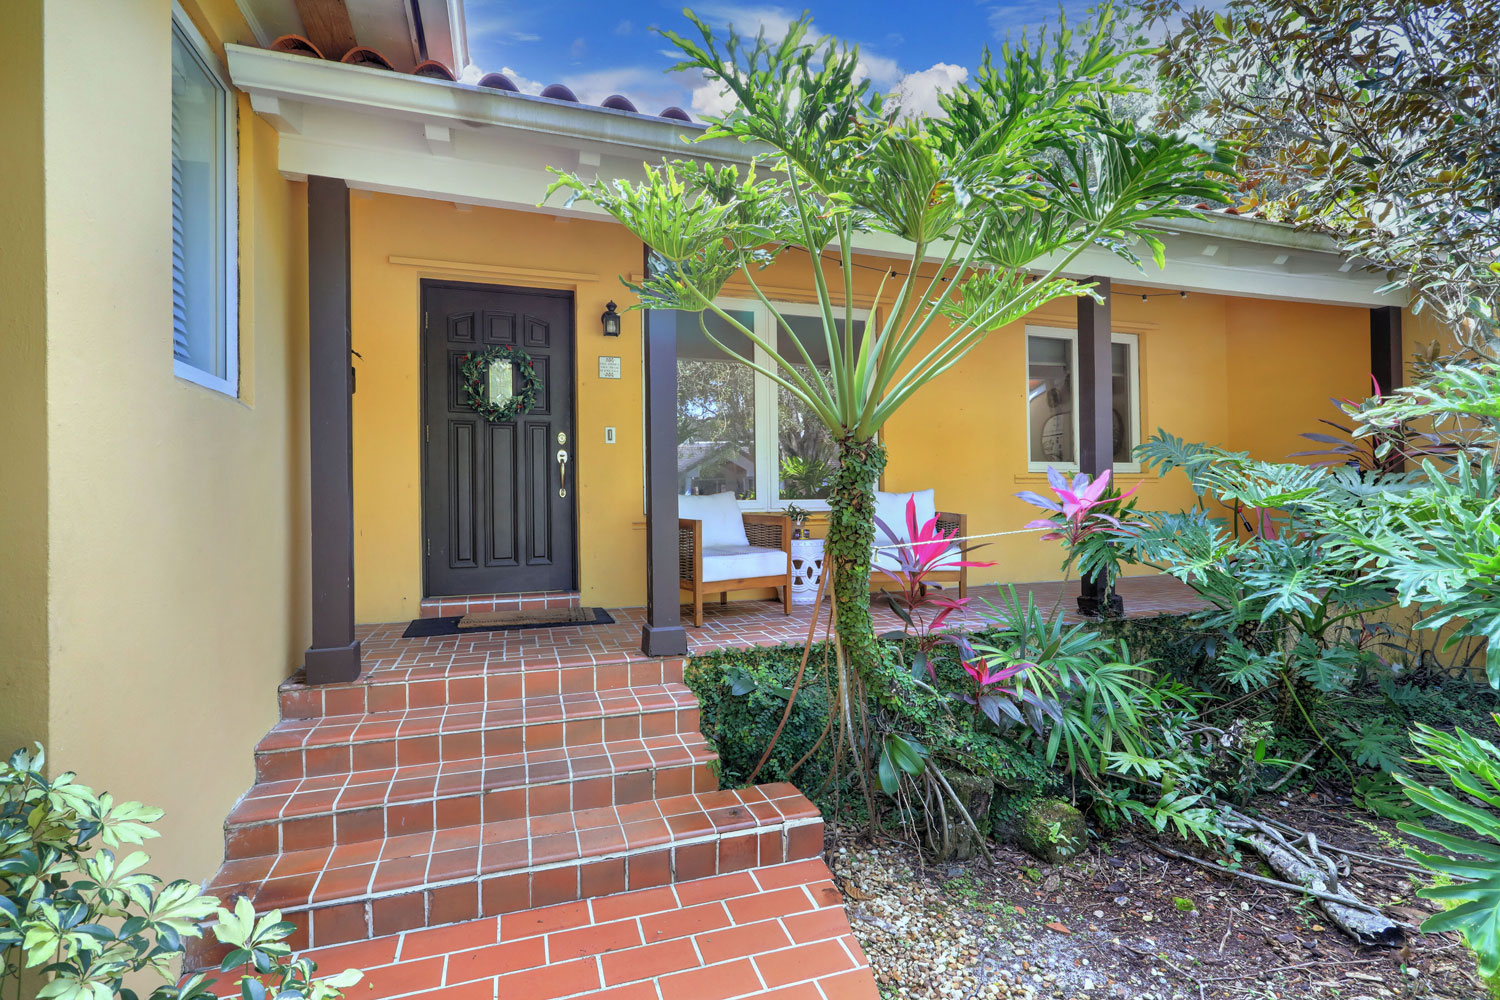 Coral Gables Rental Home